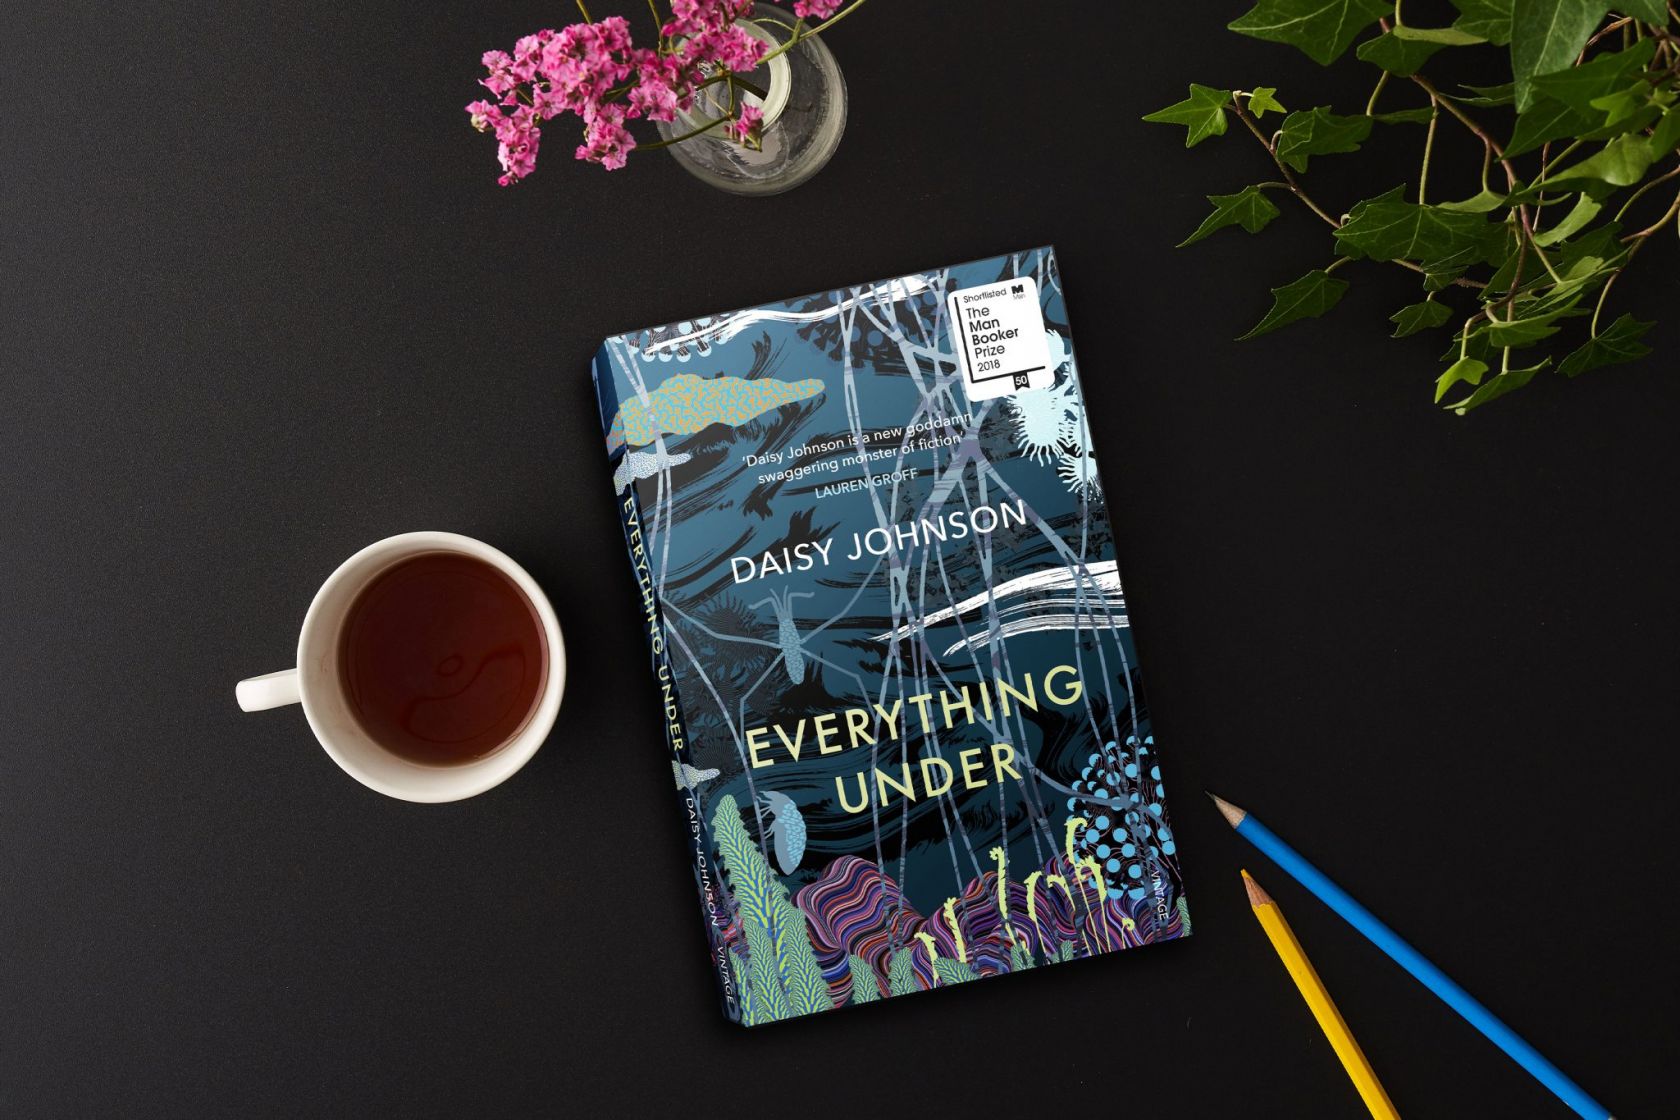 everything under by daisy johnson